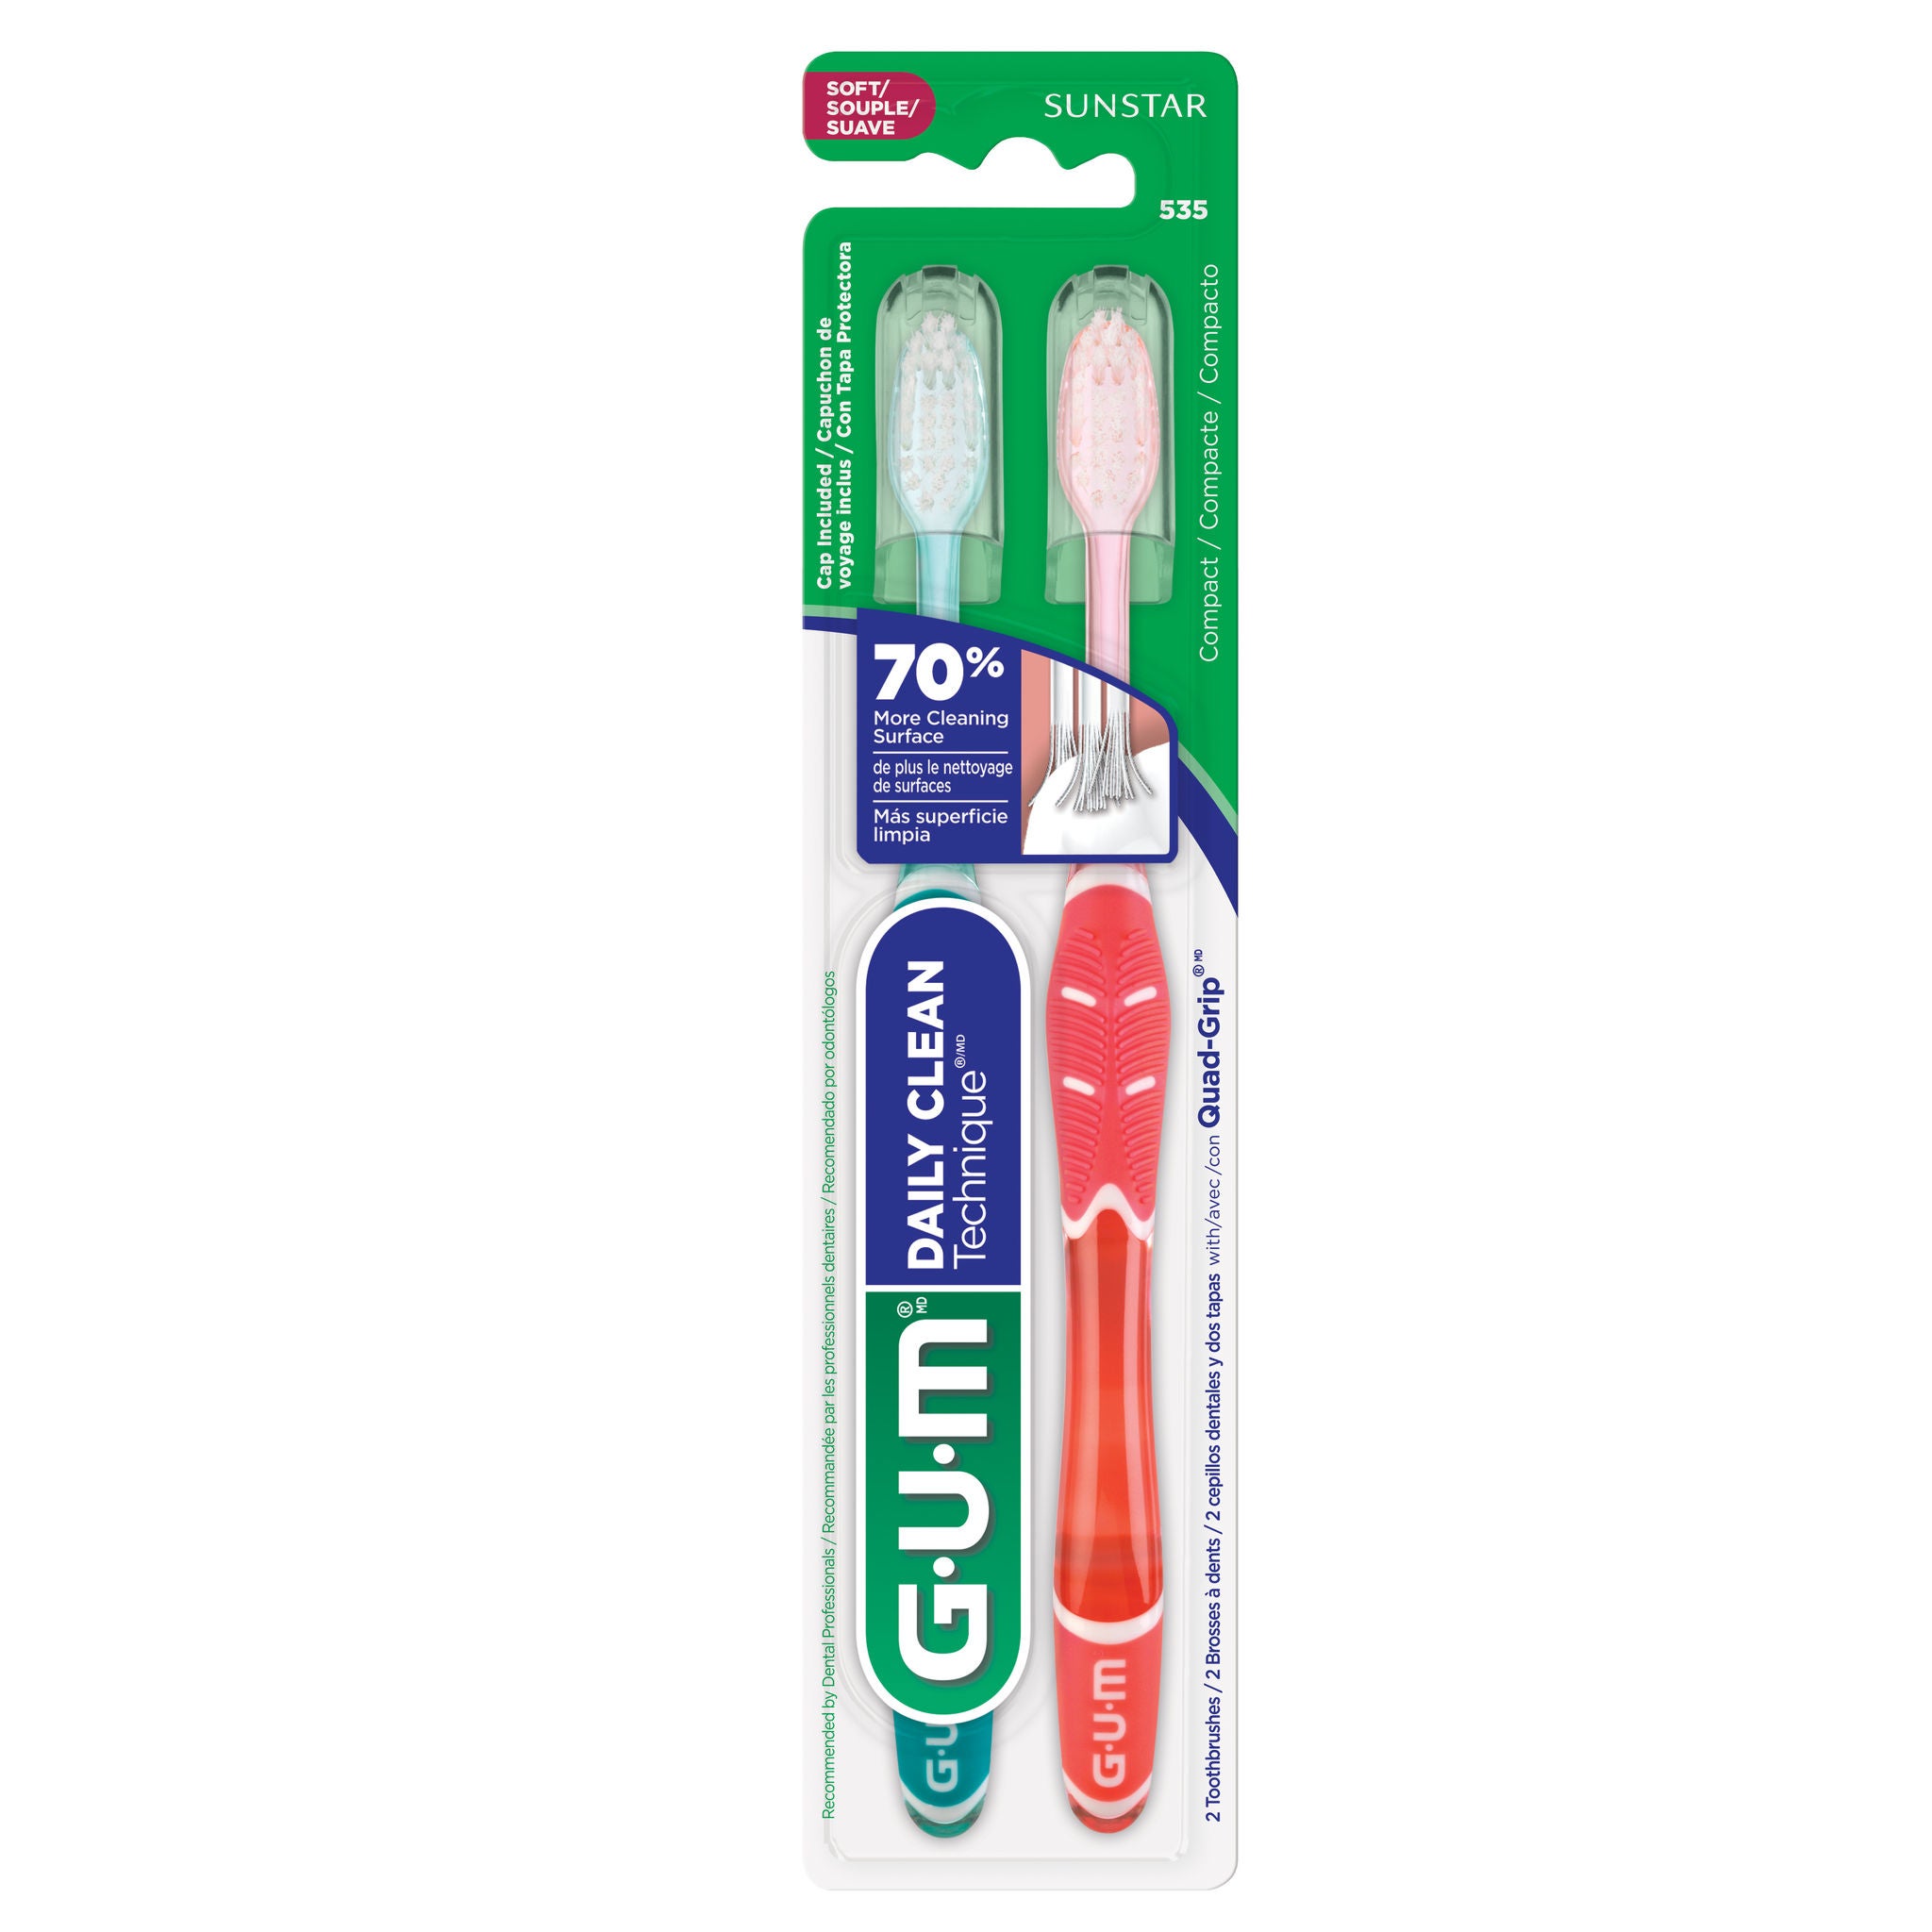 535V-Product-Packaging-Toothbrush-Technique-DailyClean-FRONT-2ct.jpg